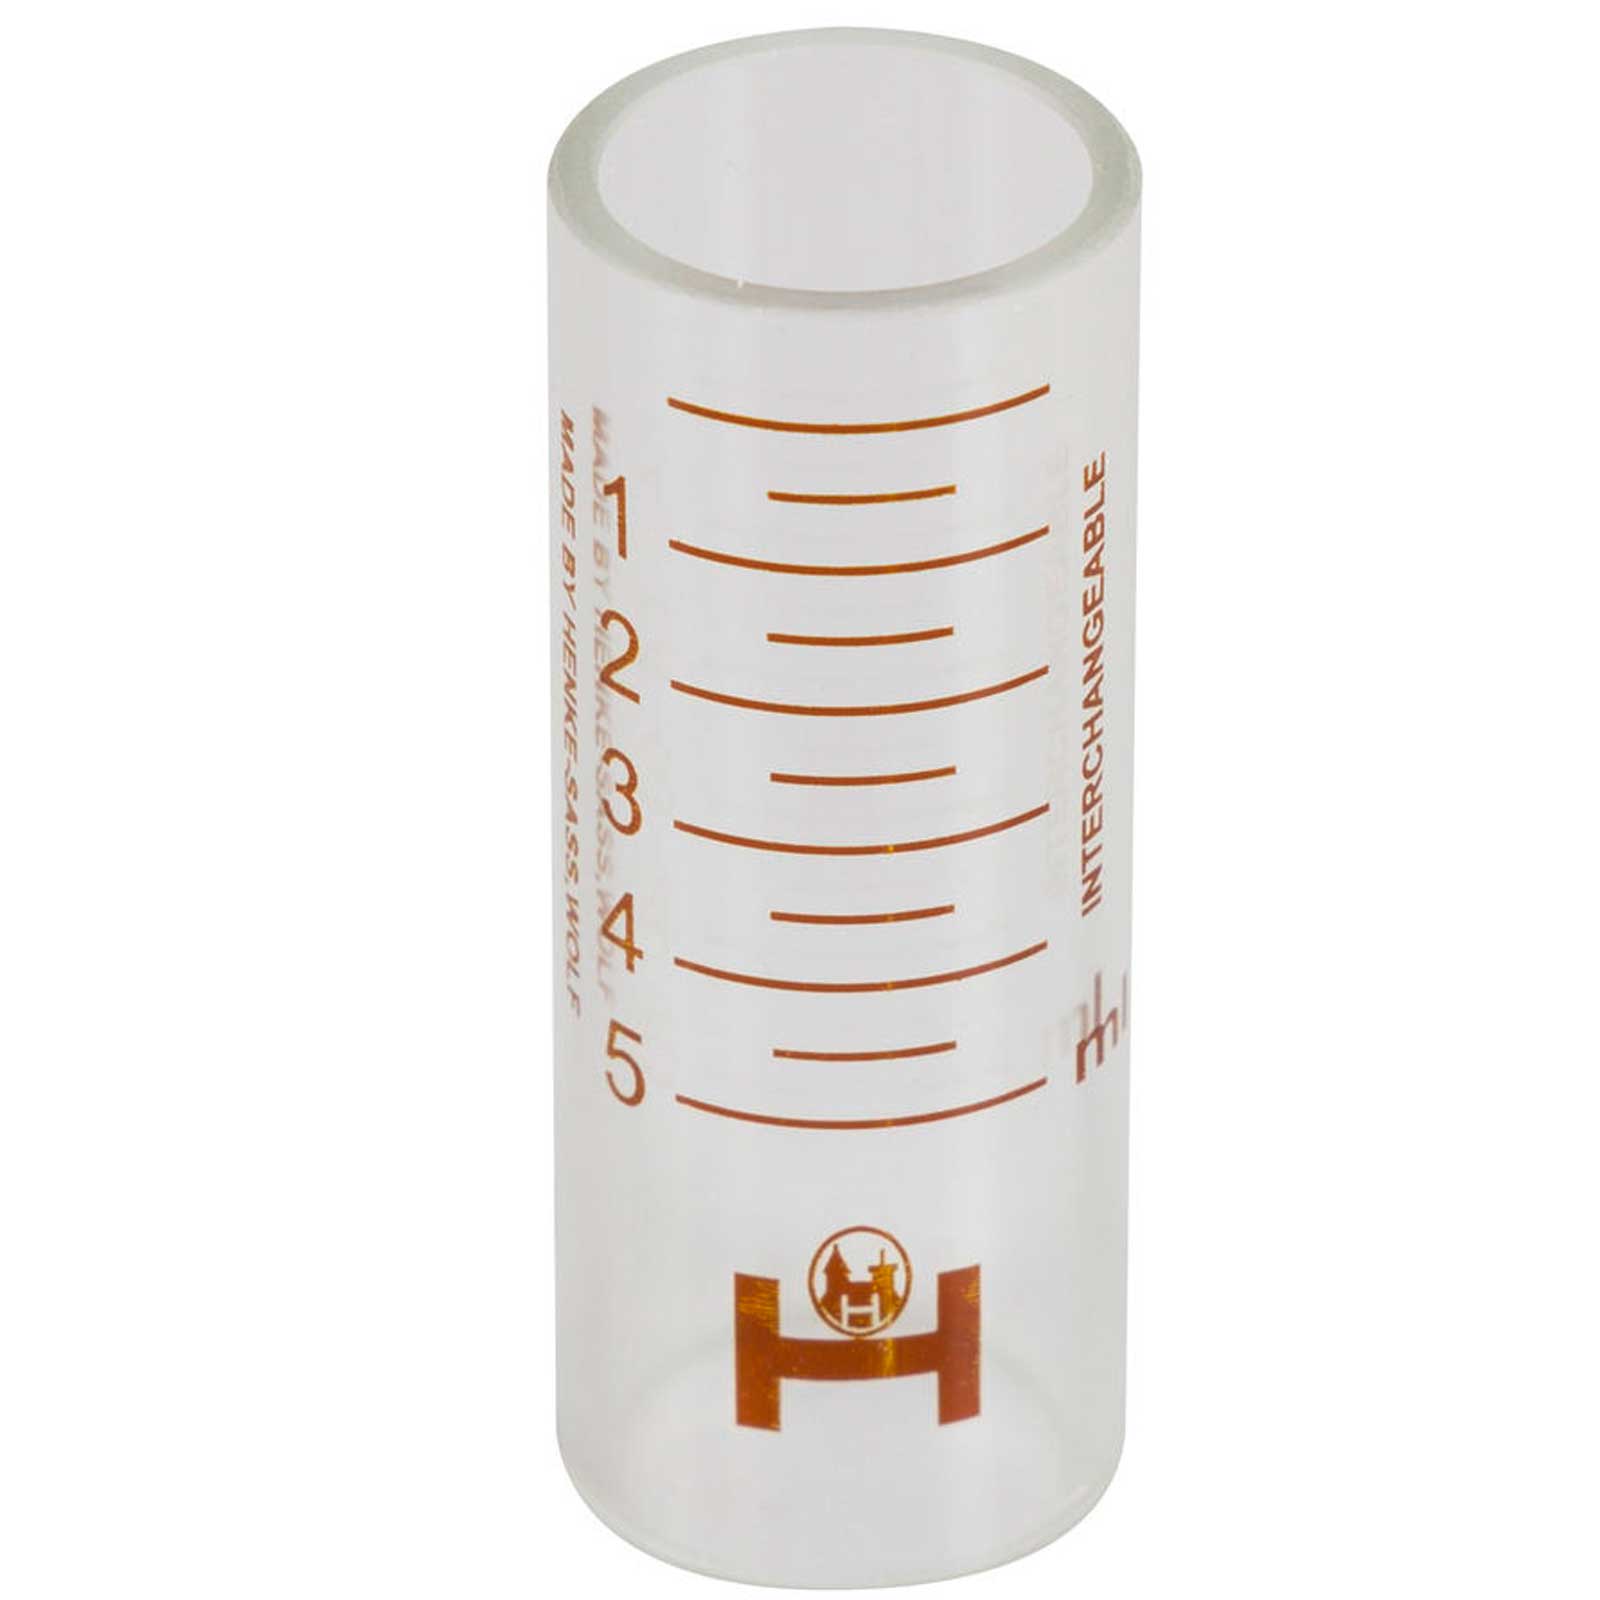 HSW replacement cylinder for FERRO-MATIC